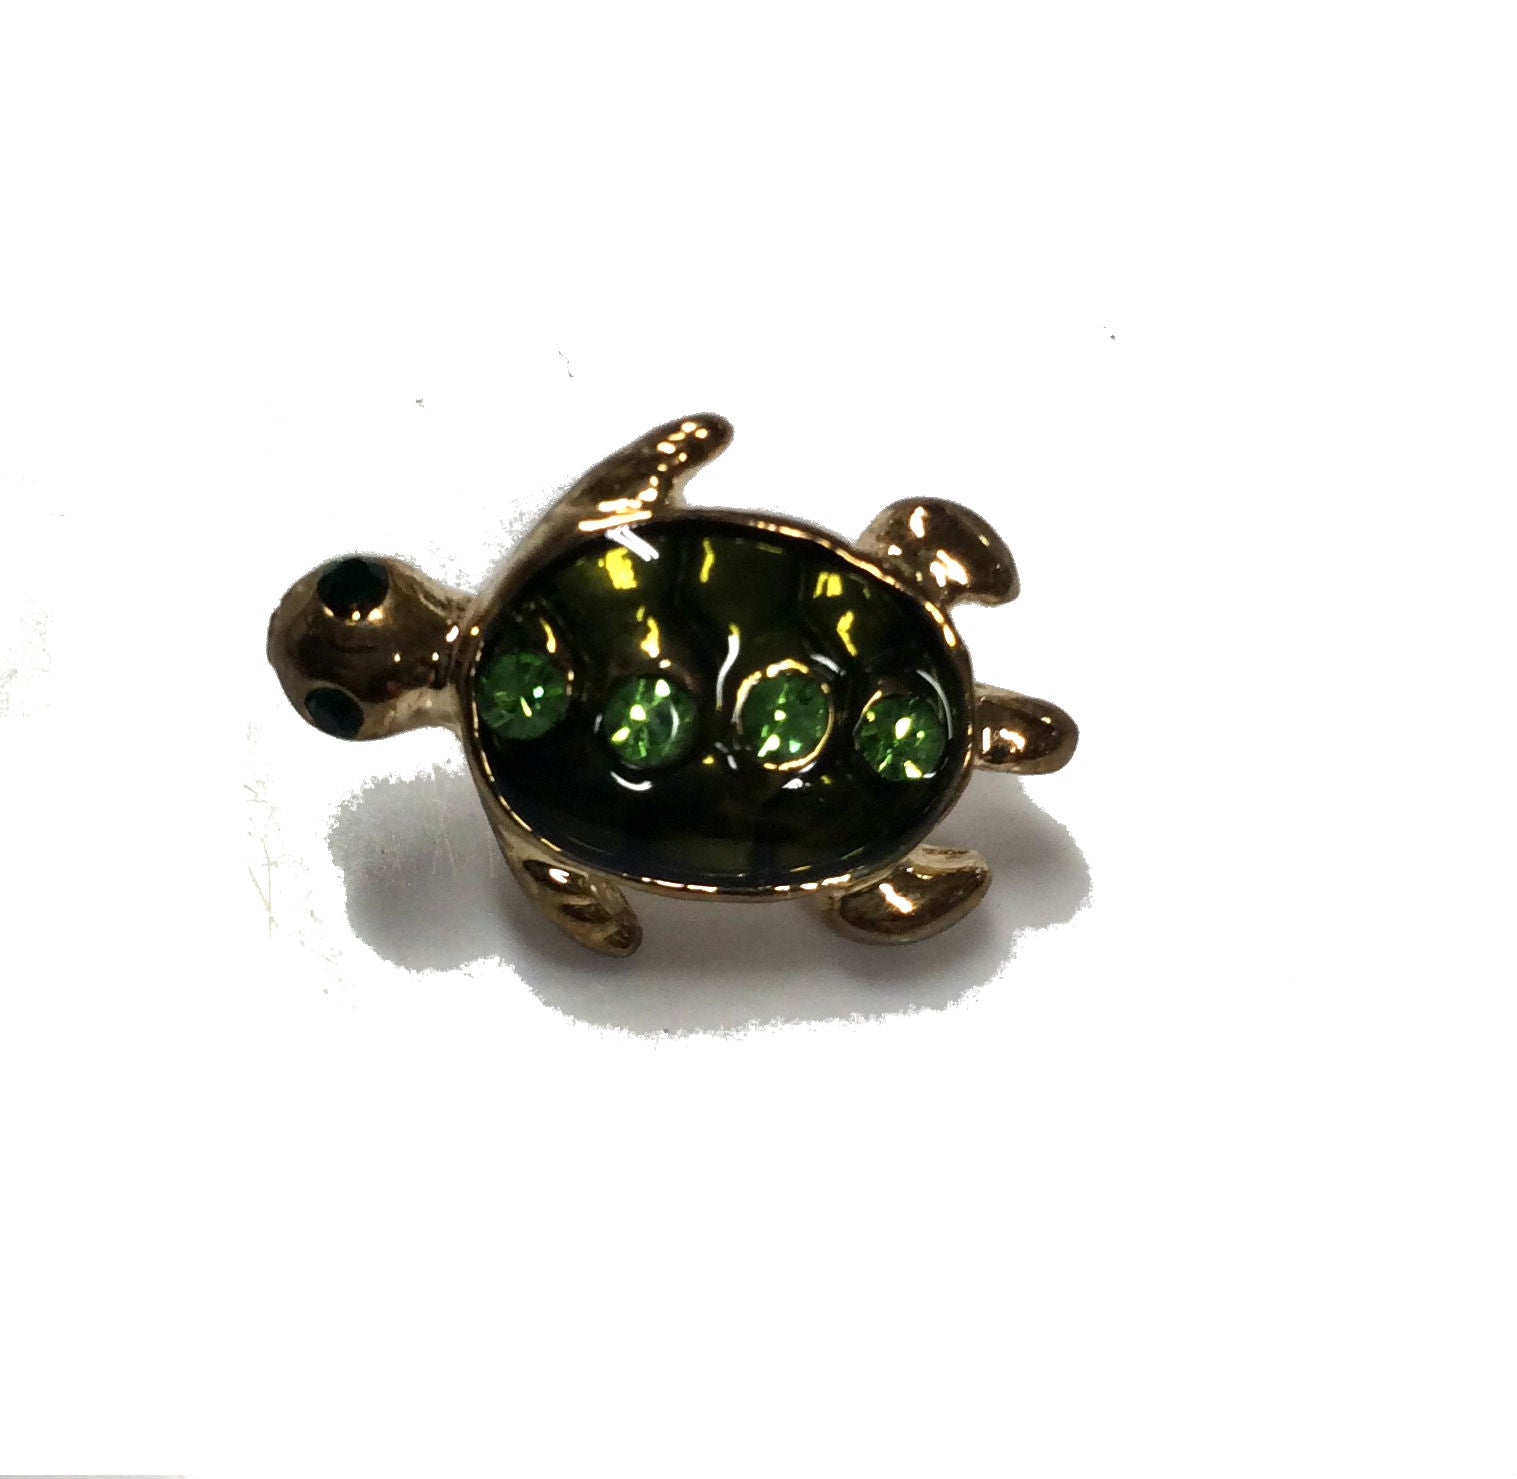 Tiny Turtle Tack Pin #38-6430GN